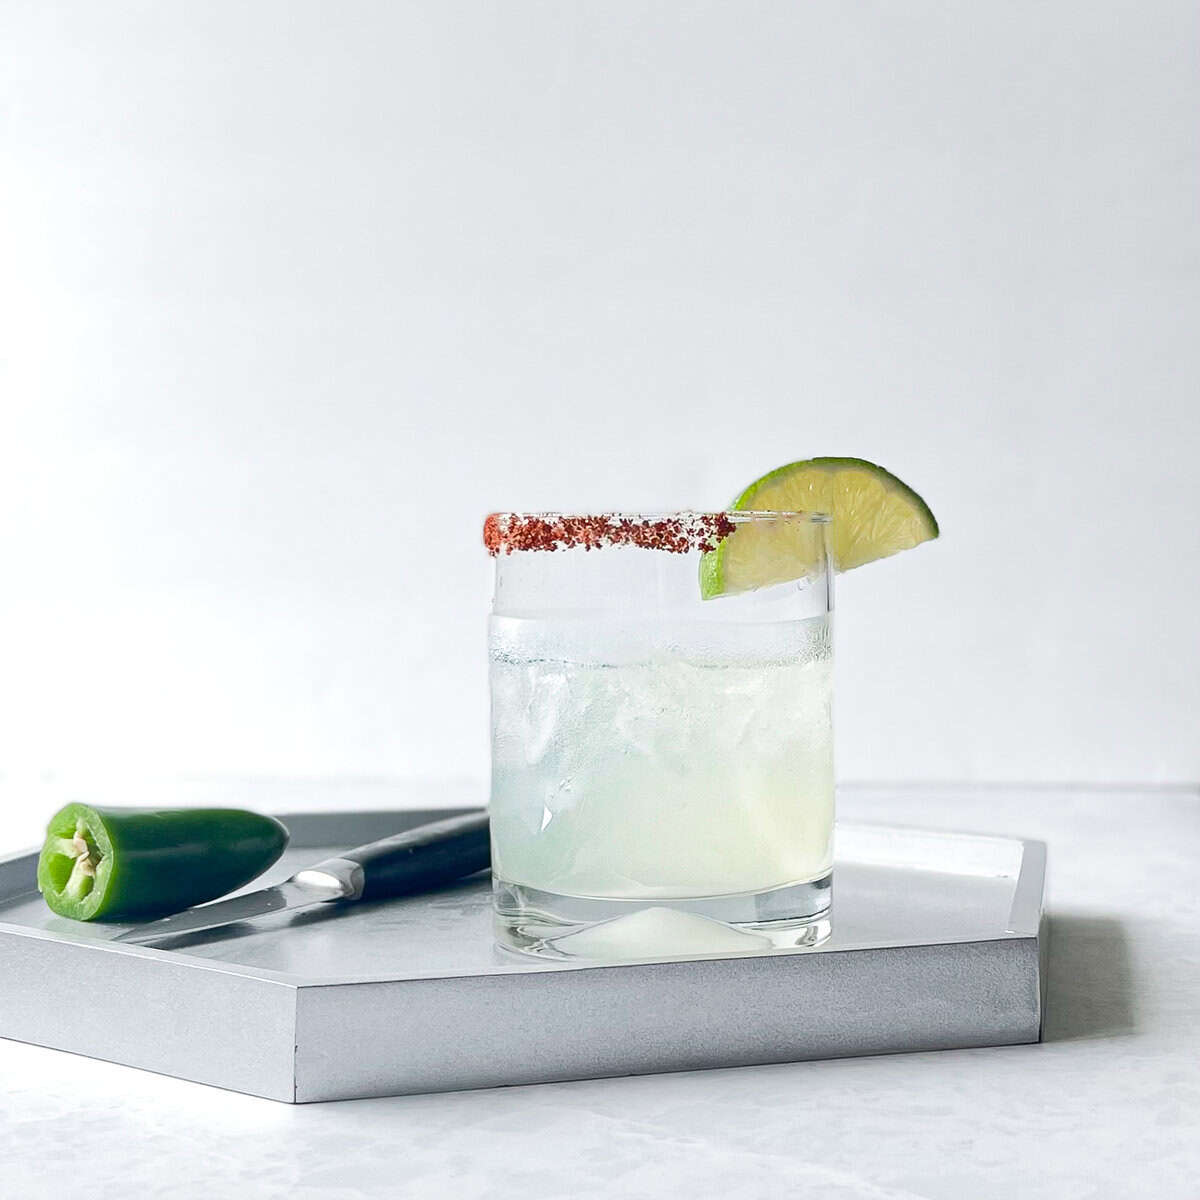 lowball glass filled with crushed ice and pale cocktail. The glass is rimmed with a reddish salt and there is a lime wedge garnish. The cocktail sits on a silver tray with a cut jalapeno and paring knife.